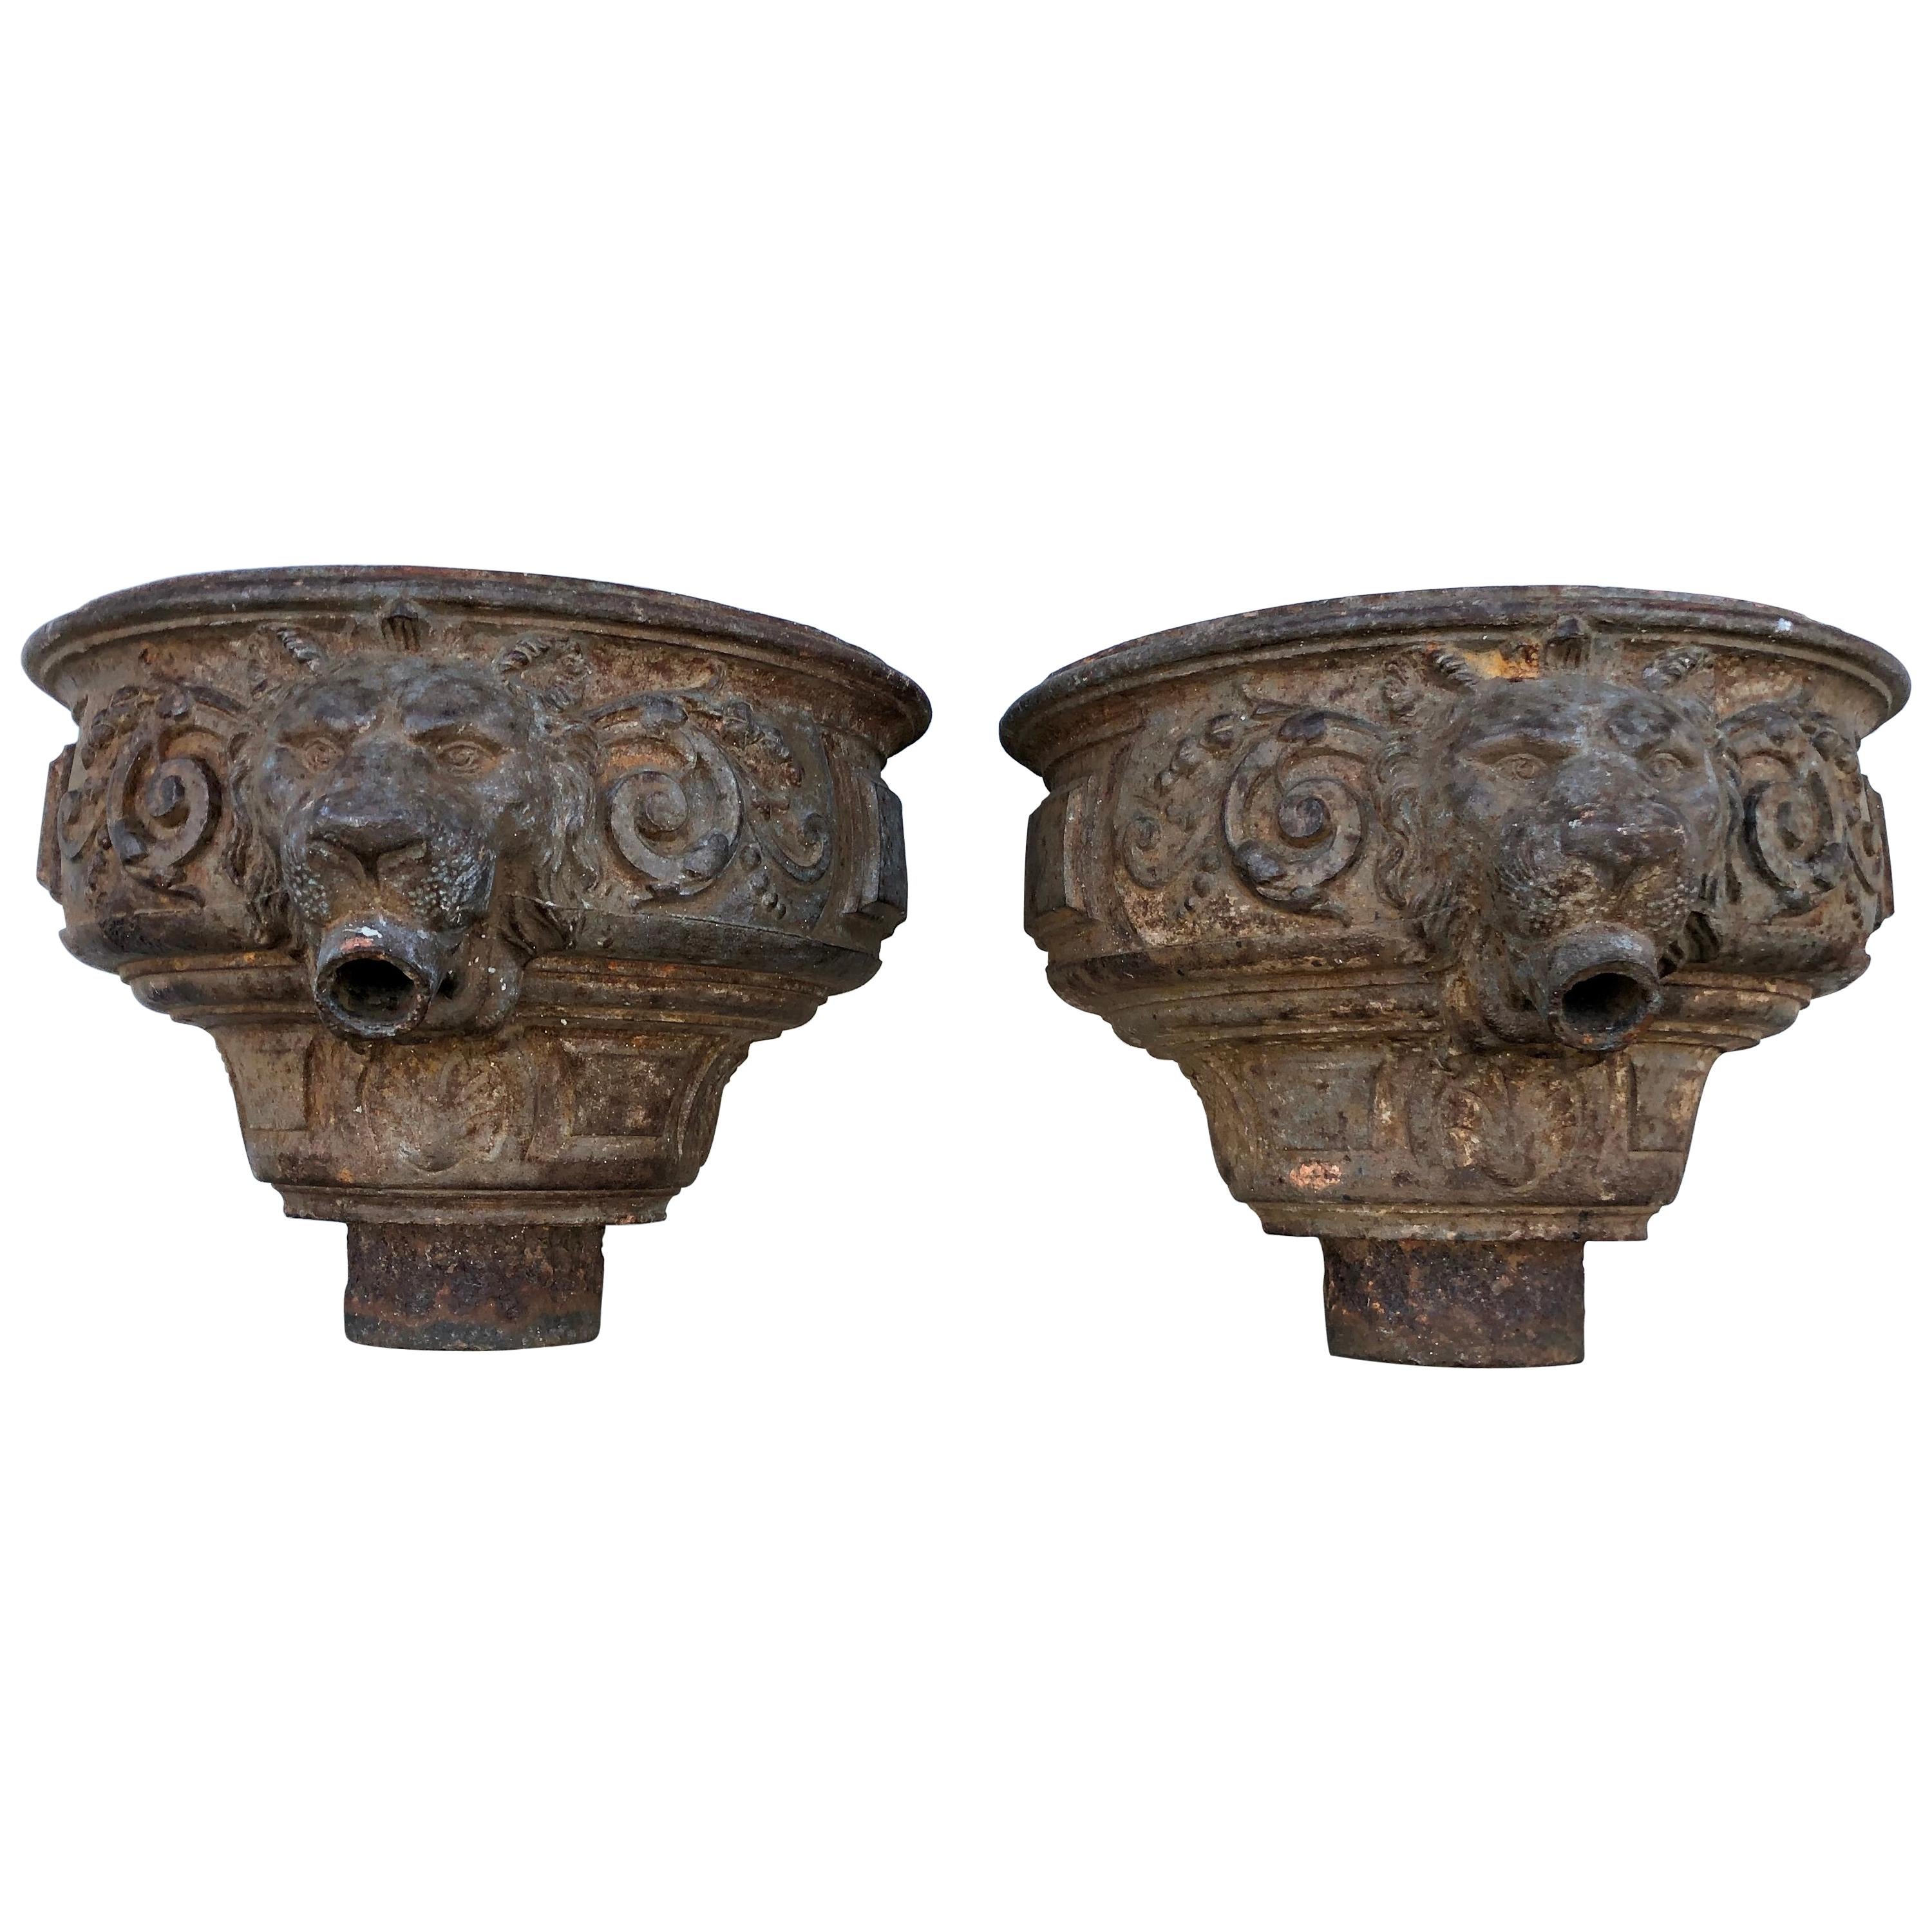 Cast Iron Downspouts with Lions Face Details Late 19th Century